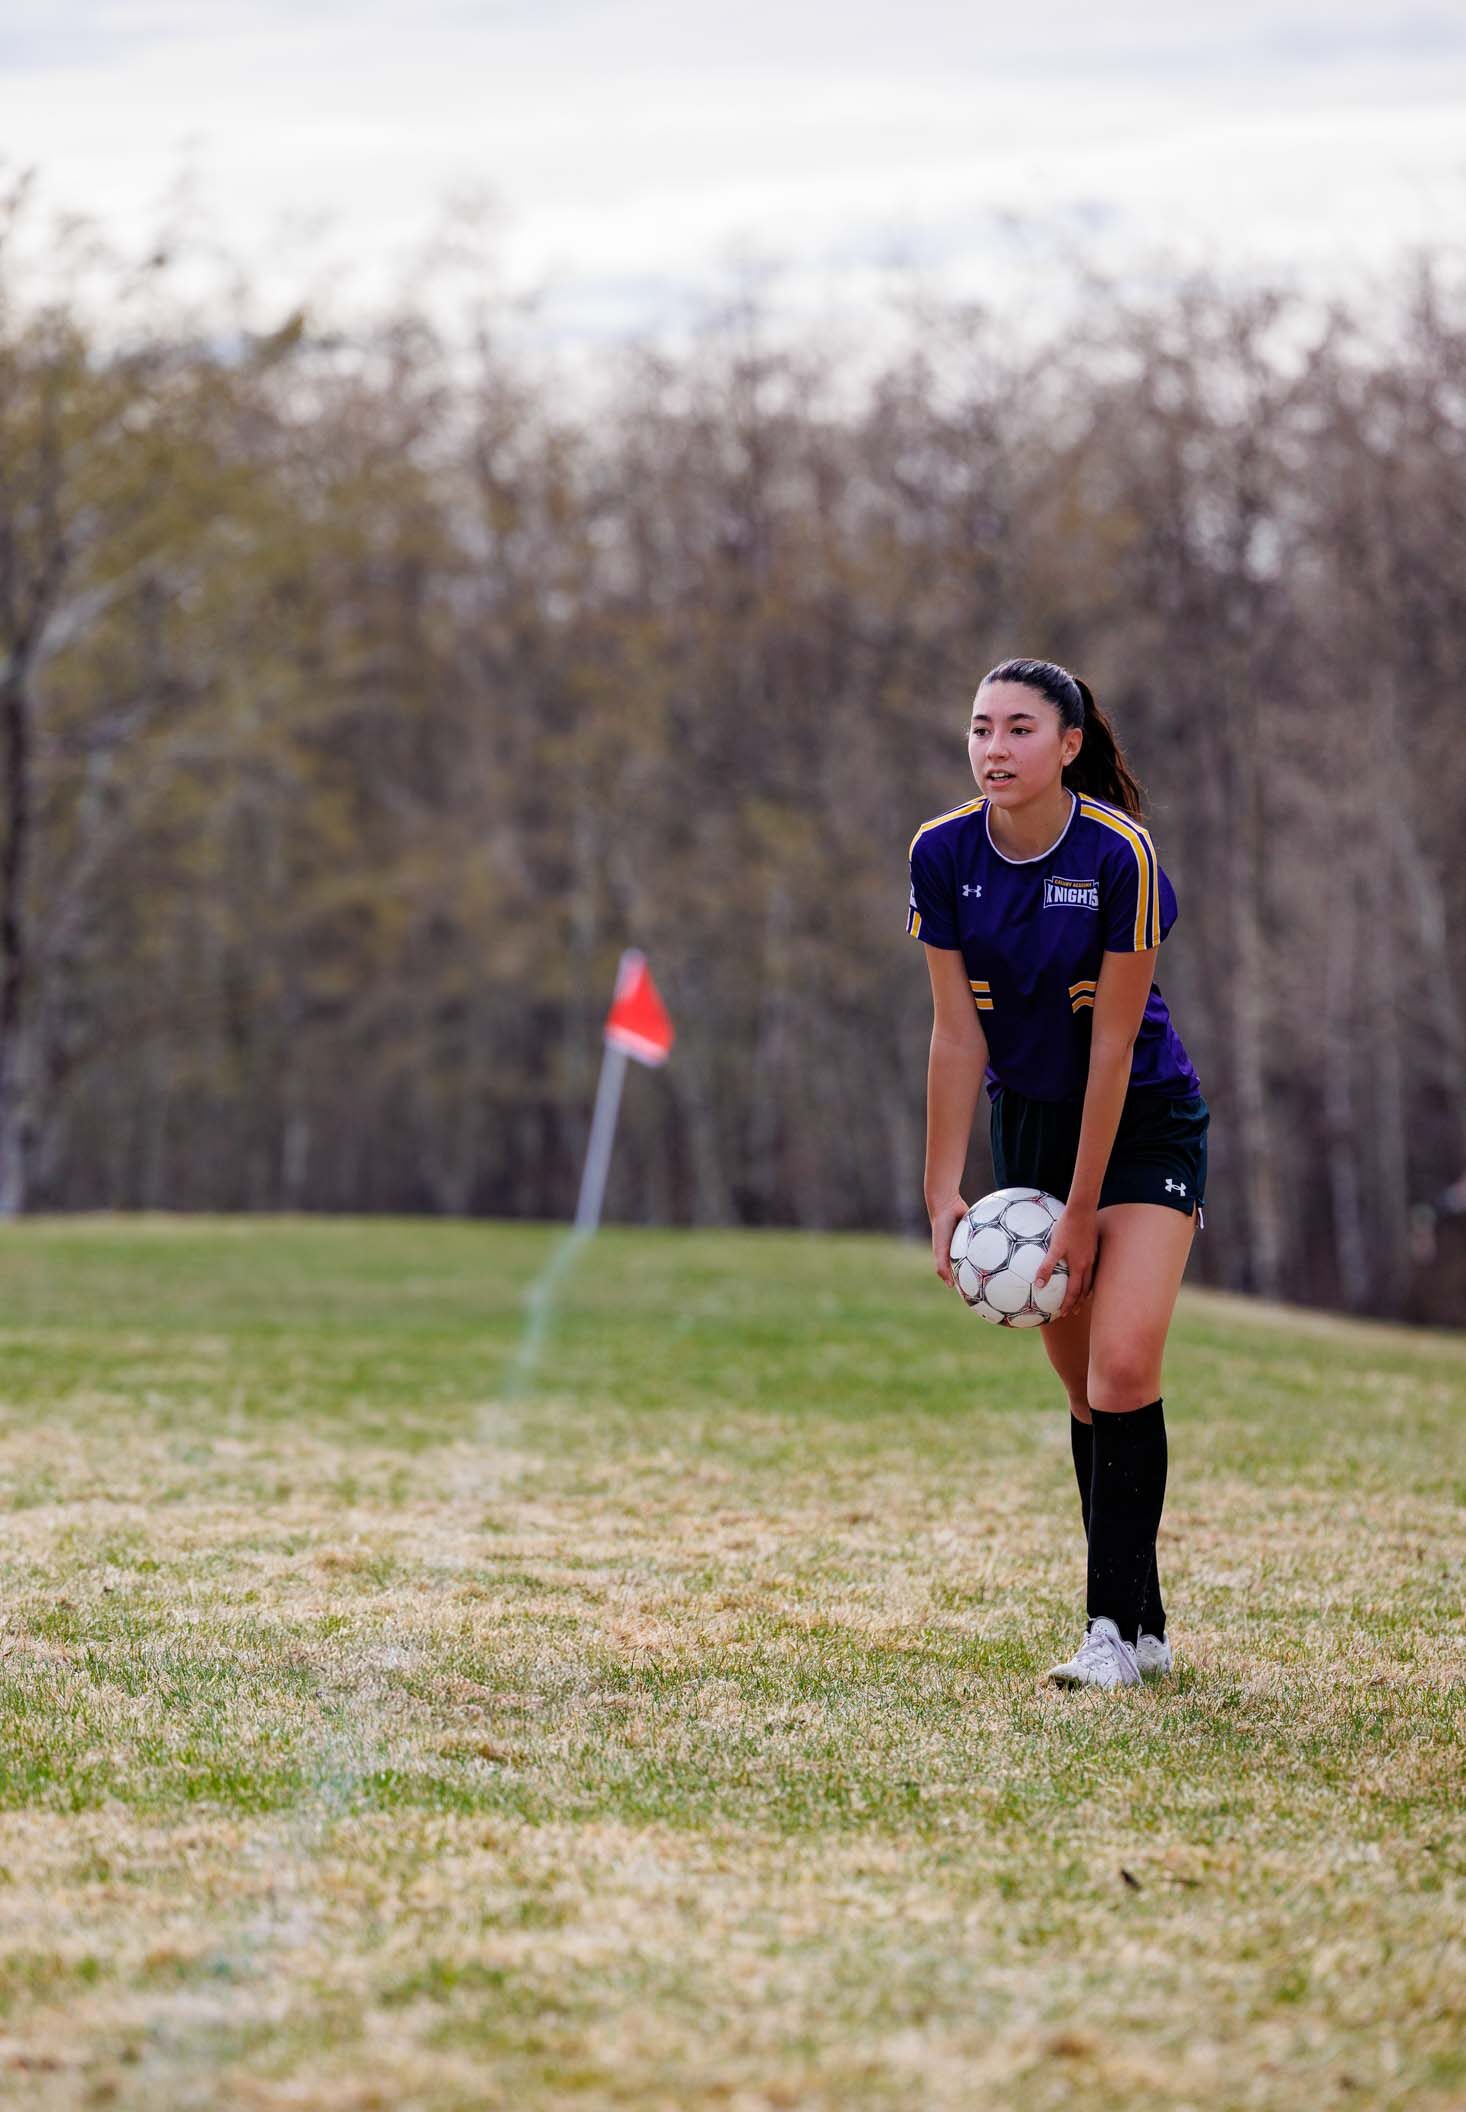 Calgary Academy student Olivia Y. throws the ball into play during a recent soccer game.